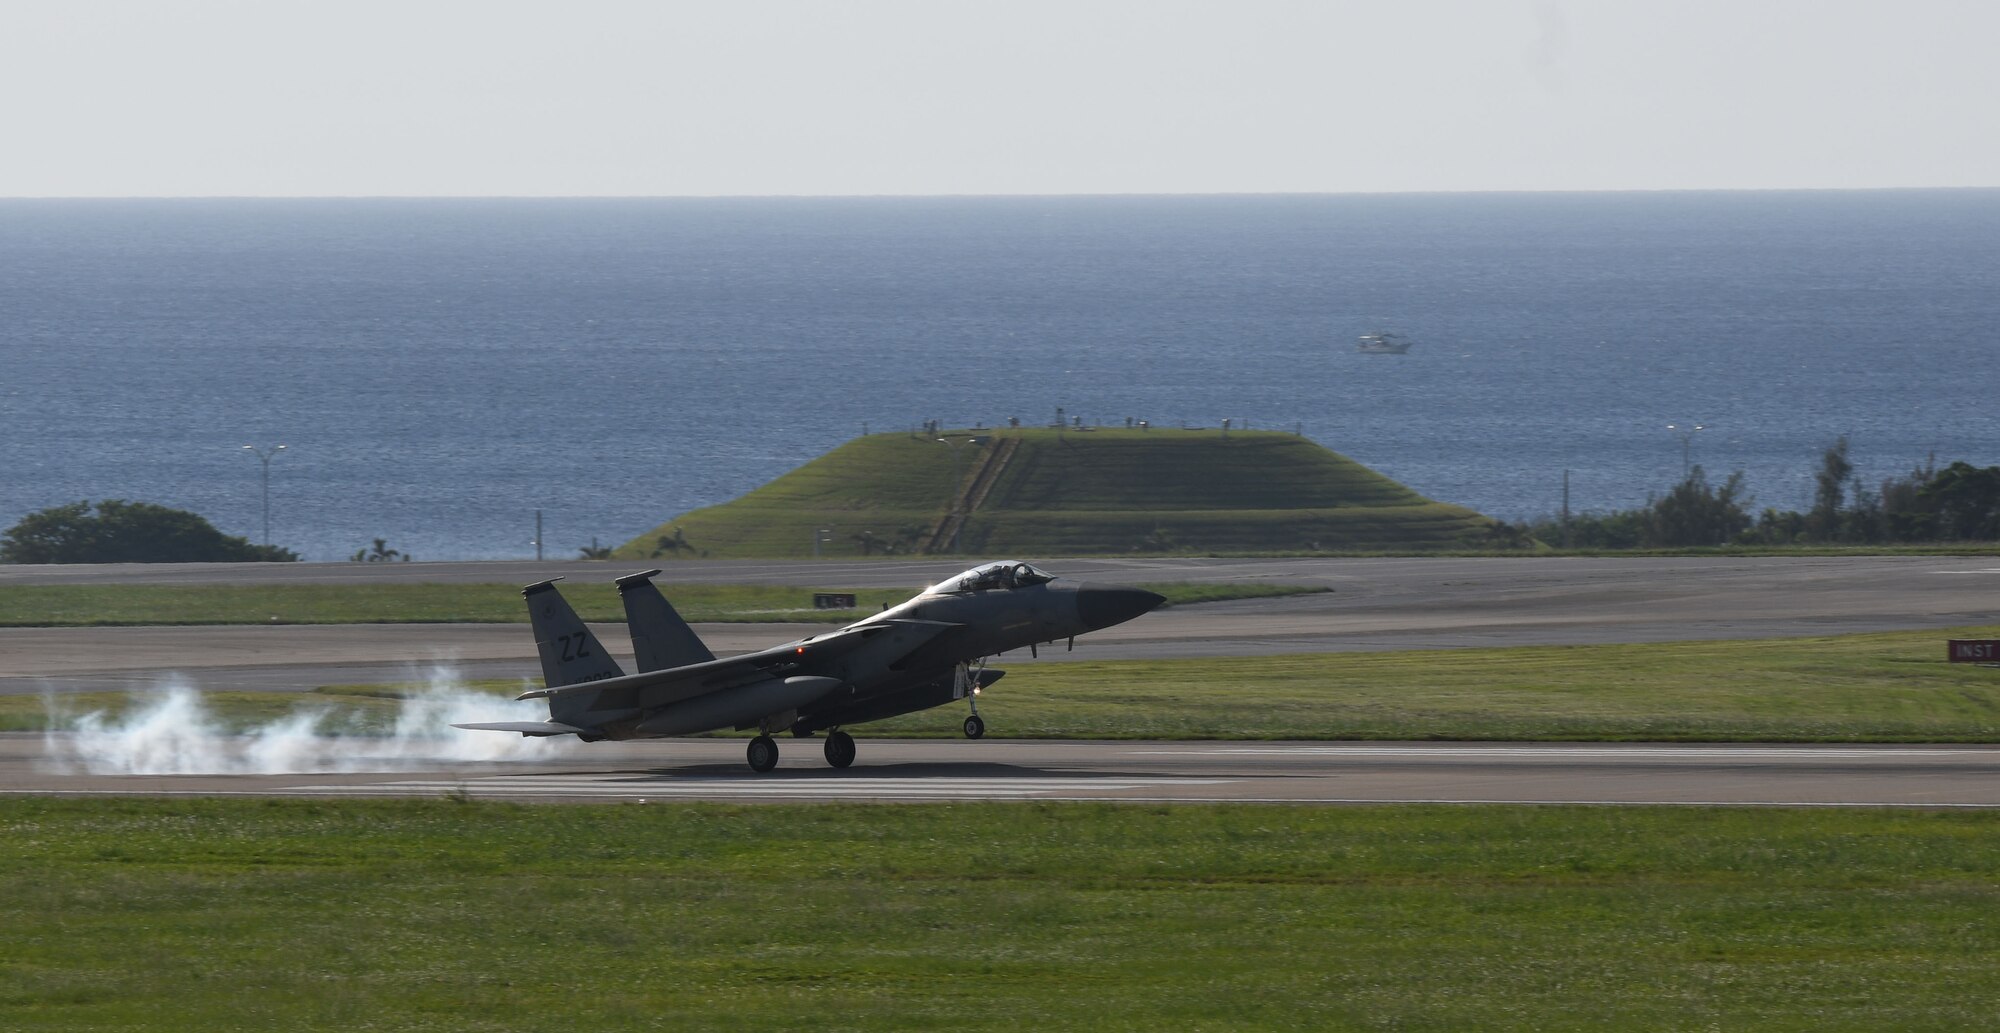 A U.S. Air Force F-15C Eagle from the 44th Fighter Squadron lands at Kadena Air Base, Japan, Oct. 3, 2020, after returning from a deployment to the U.S. Central Command theater to defend U.S. and partner nation interests, while creating logistical flexibility. During their deployment, Airmen assigned to 18th Aircraft Maintenance Squadron, 18th Component Maintenance Squadron, 18th Equipment Maintenance Squadron, 18th Munitions Squadron, 18th Maintenance Operations Flight, and 18th Operations Support Squadron along with the 44th FS supported ongoing operations maintaining air superiority, defending forces on the ground, enhancing regional partnerships, and demonstrating a continued commitment to regional security and stability. (U.S. Air Force photo by Tech. Sgt. Benjamin Sutton)